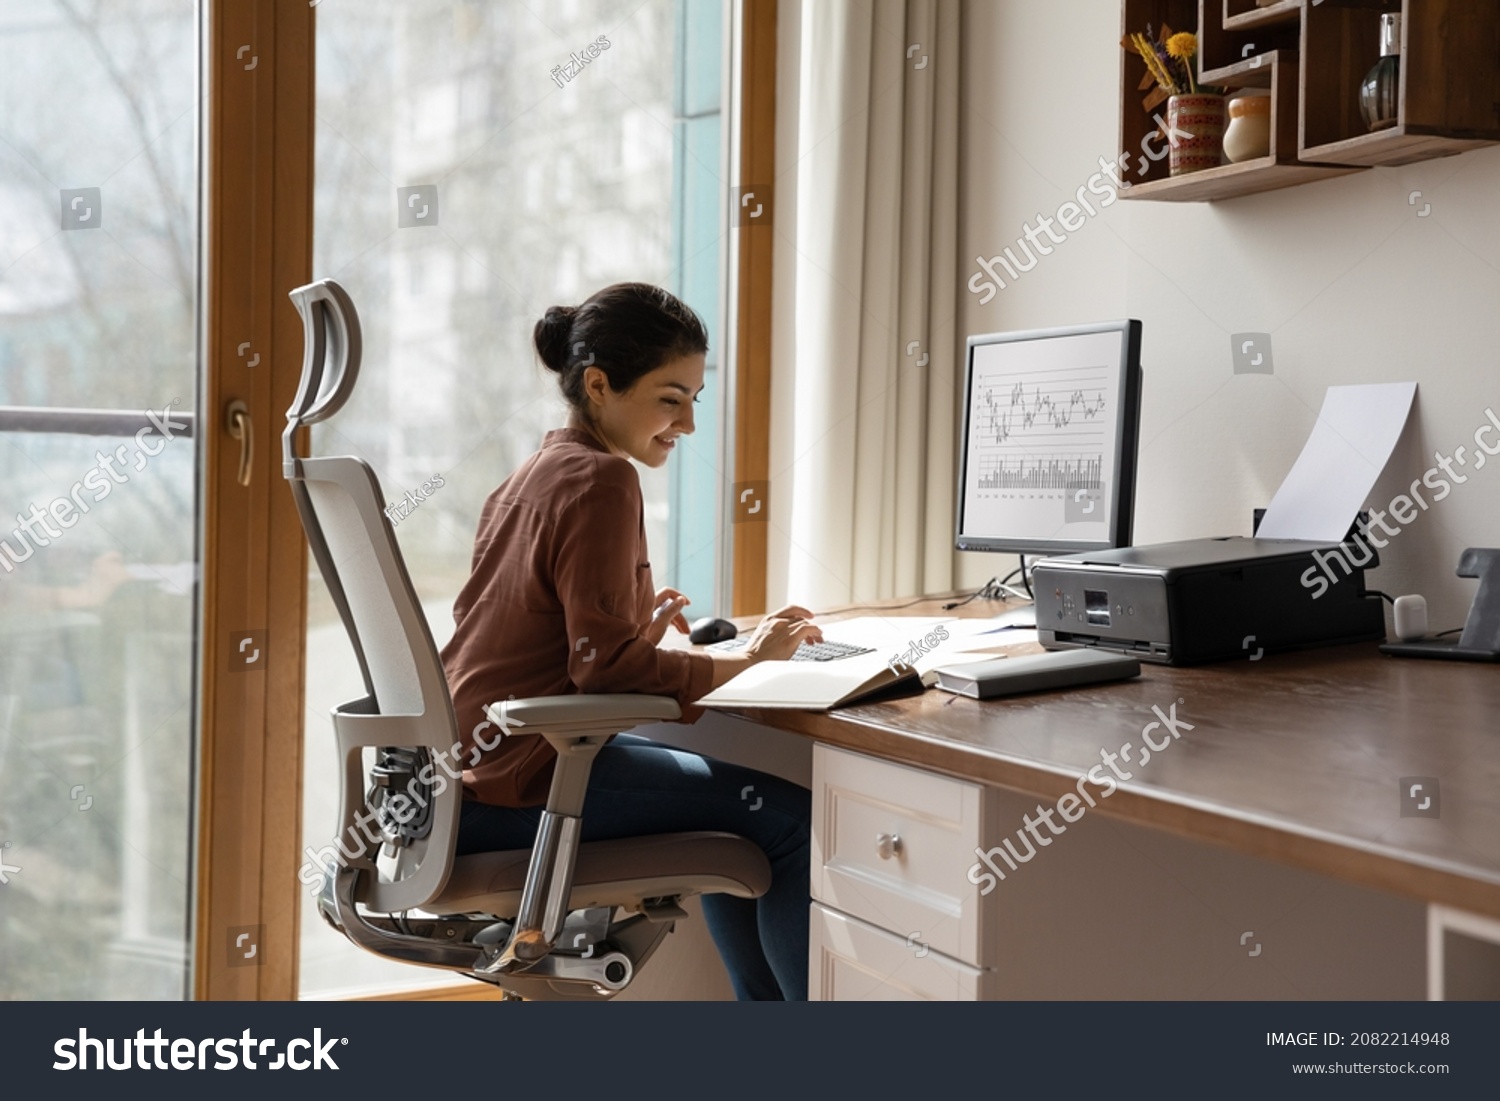 Concentrated young indian ethnicity woman sitting in comfortable adjustable ergonomic armchair with lumbar support, studying or working on computer in modern home office. distant workday concept. #2082214948